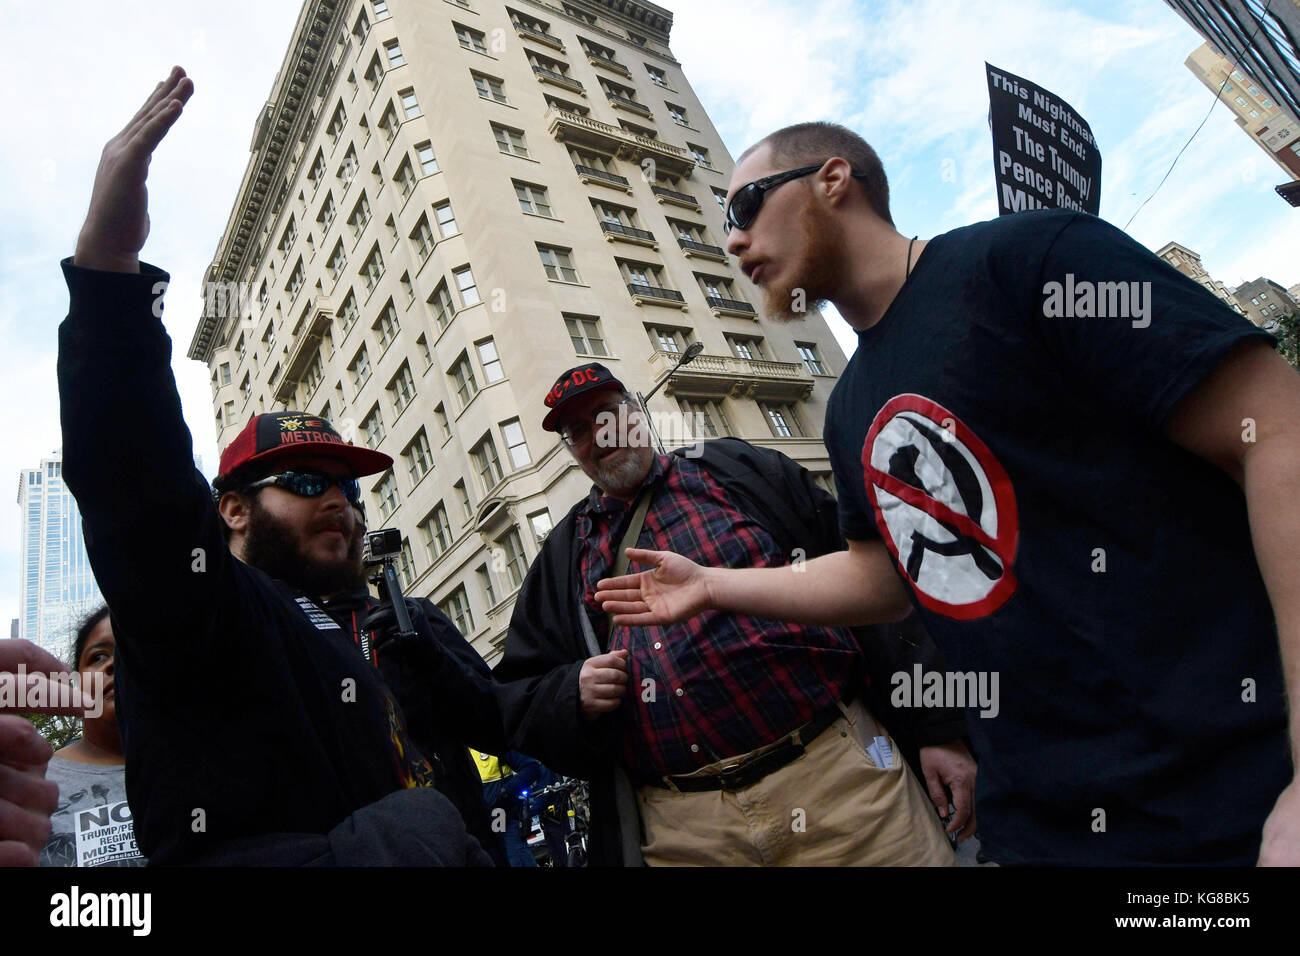 Philadelphia, United States. 04th Nov, 2017. Protestors participating in a Refuse Fascism rally engage in discussion with counter-protestors, including white supremacists, during a Anti-Trump/Pence protest in Center City, on November 4, 2017, in Philadelphia, PA. At least one arrest was made and one received medial attention after an altercation between the two groups. Credit: Bastiaan Slabbers/Alamy Live News Stock Photo